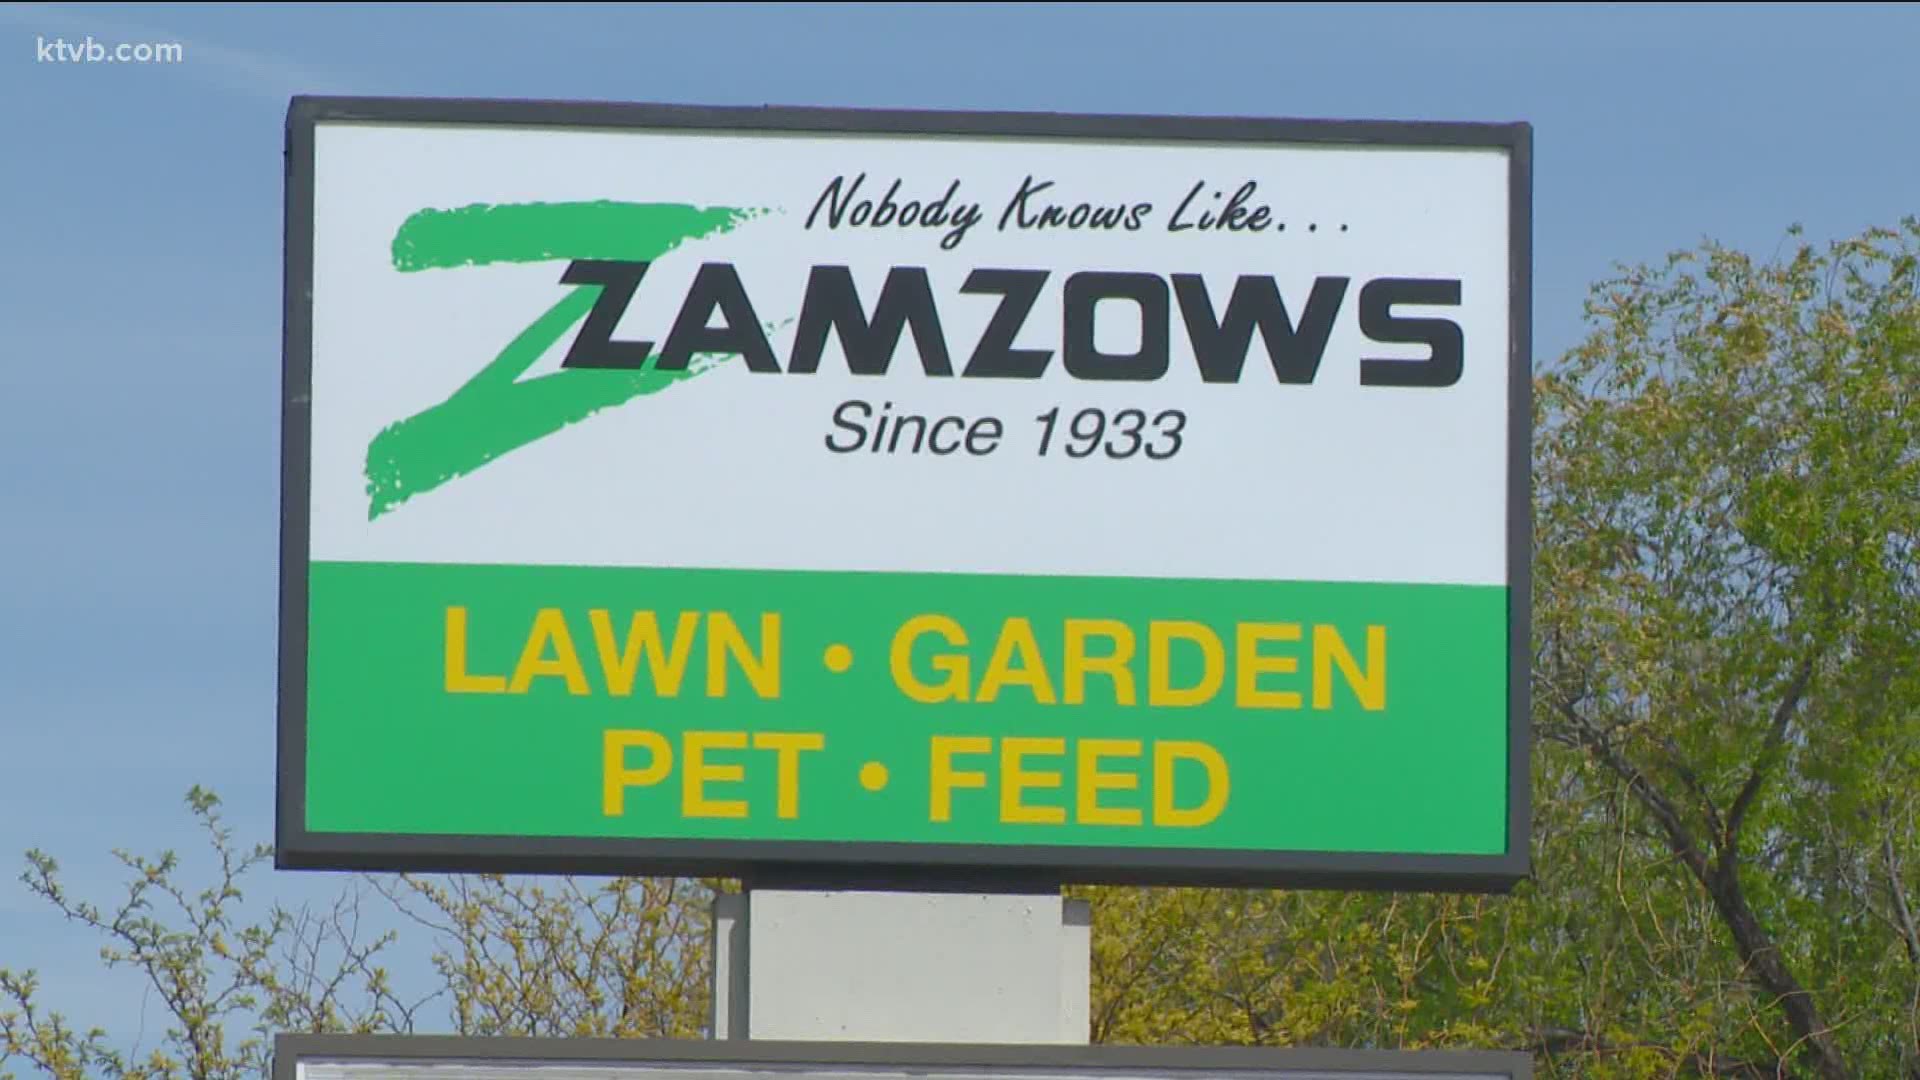 A lot of local businesses are having a hard time finding workers. Zamzows is one of them.